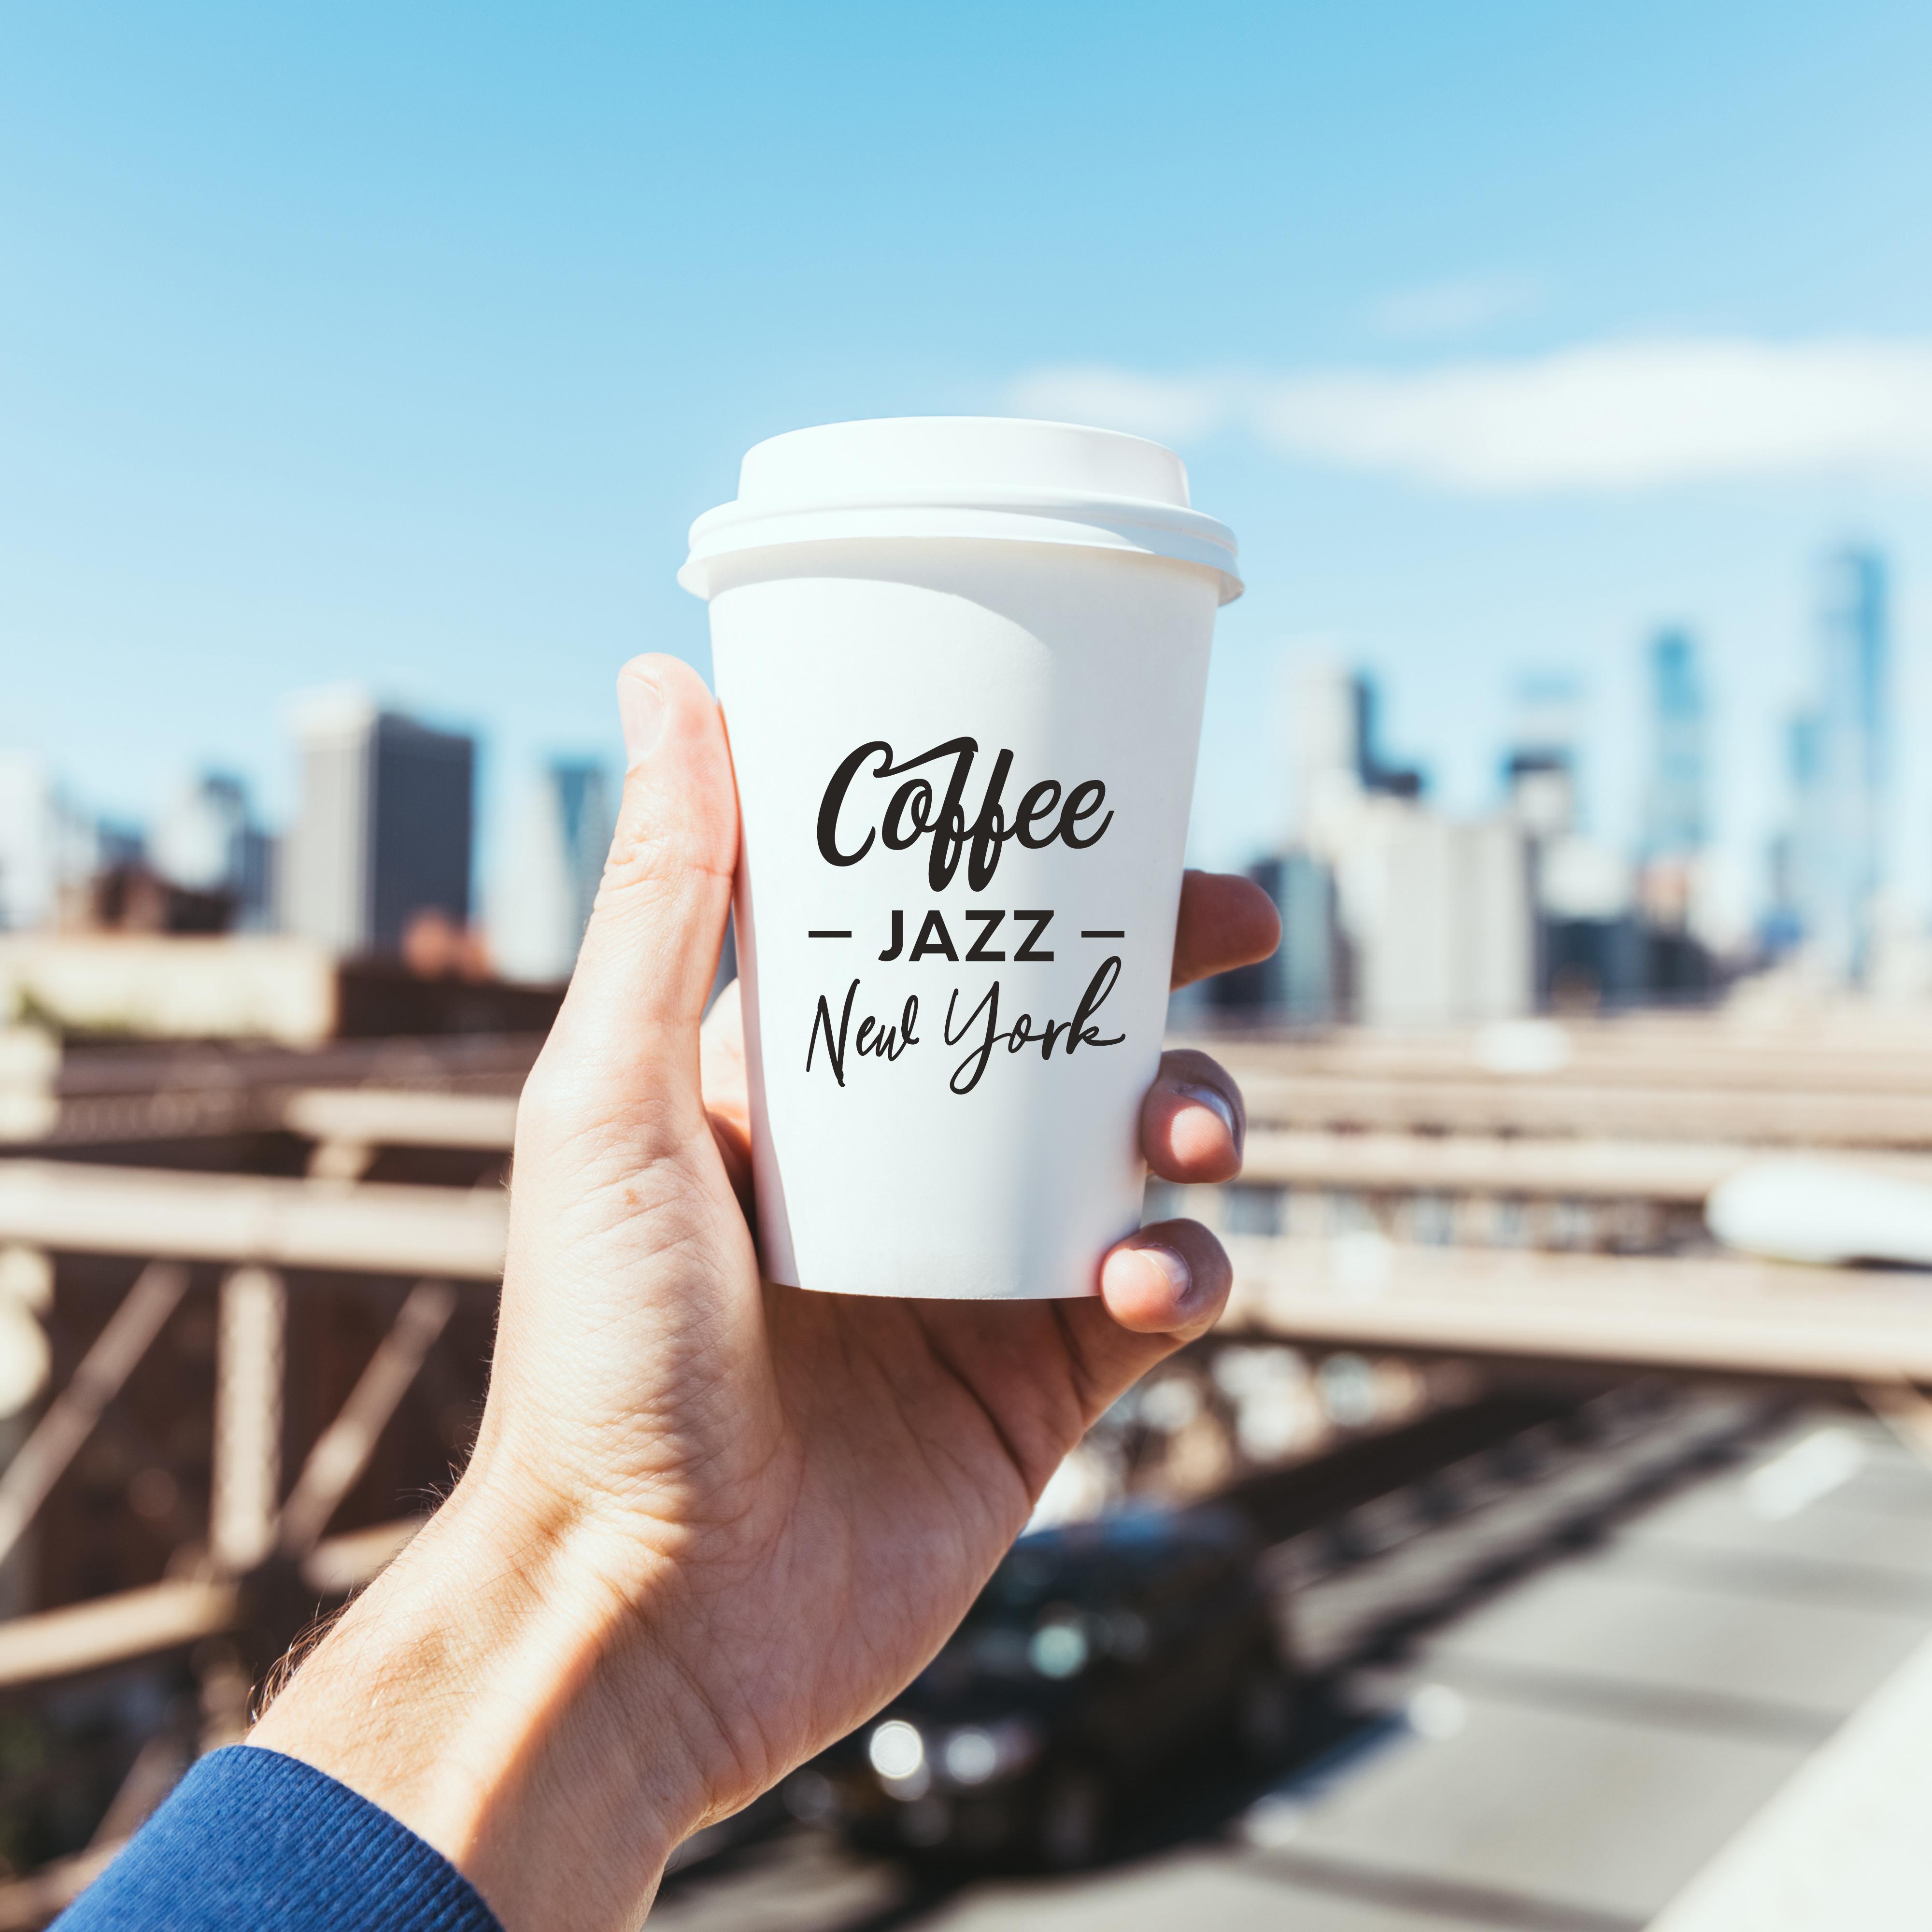 Coffee Jazz New York  Perfect Relax Zone, Coffee Music, Instrumental Songs for Dinner, Jazz Relaxation 2019